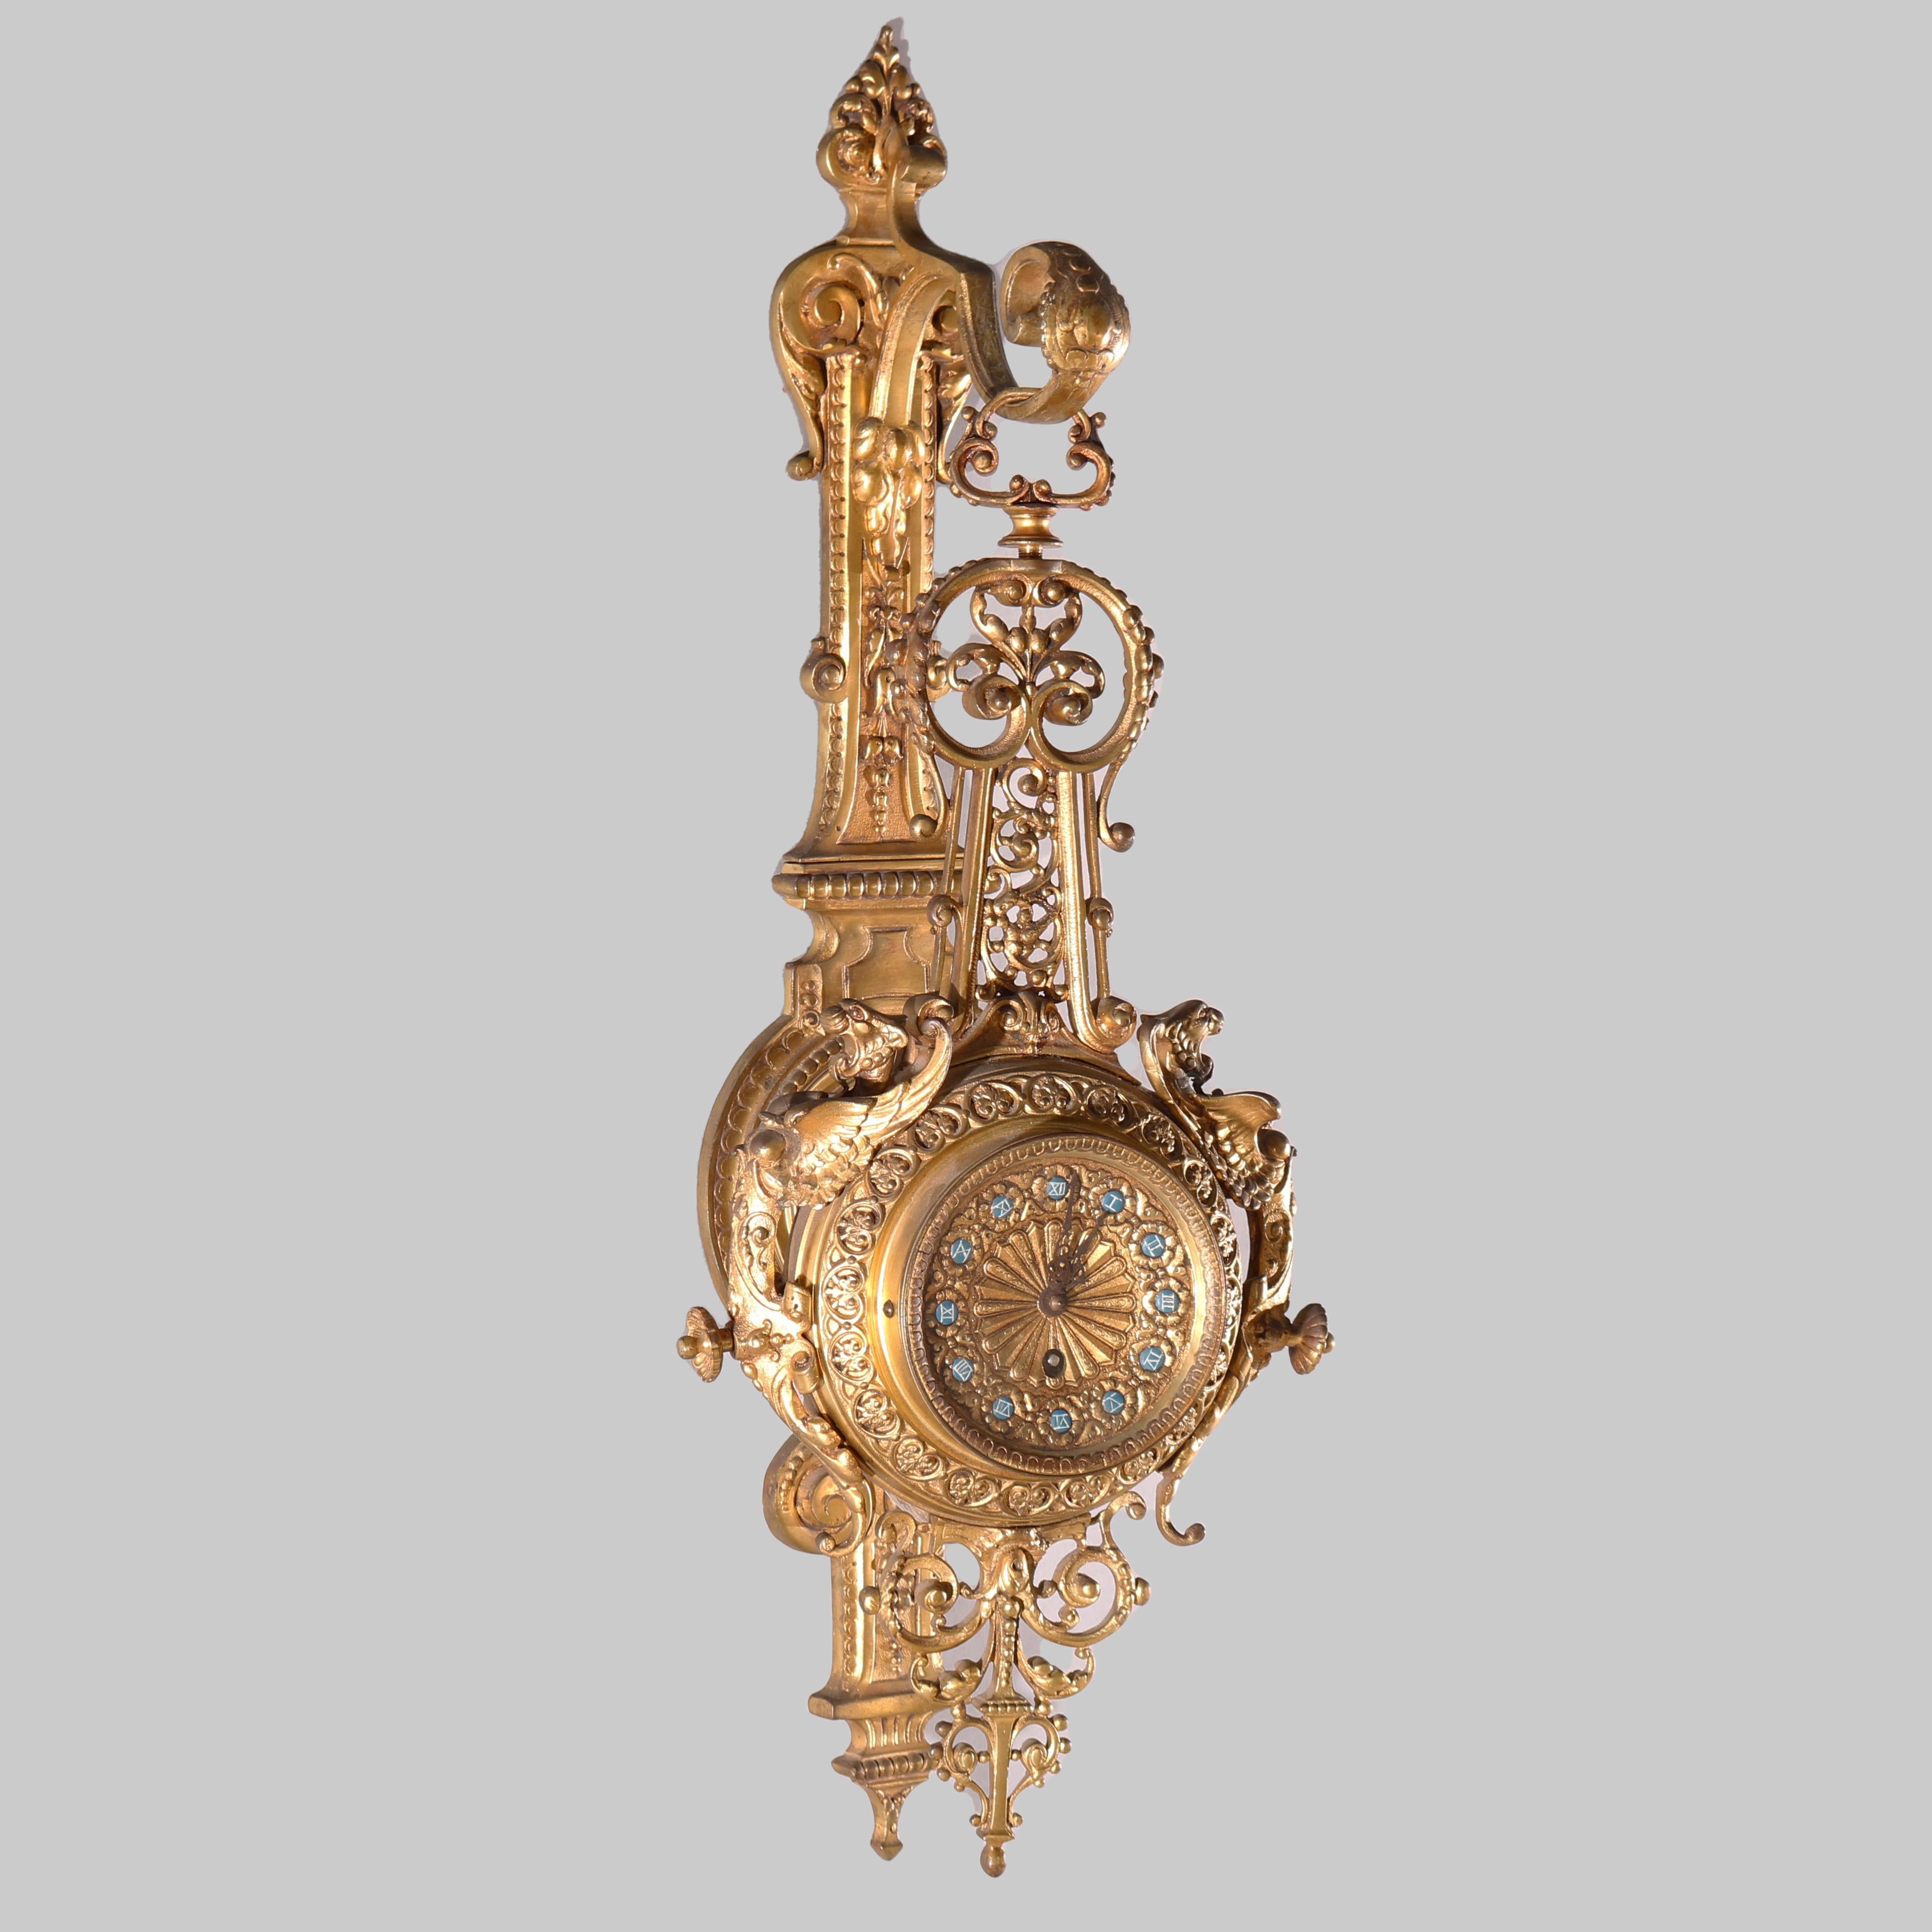 19th Century Antique French Empire Style Figural Gilt Bronze Hanging Wall Clock, circa 1880